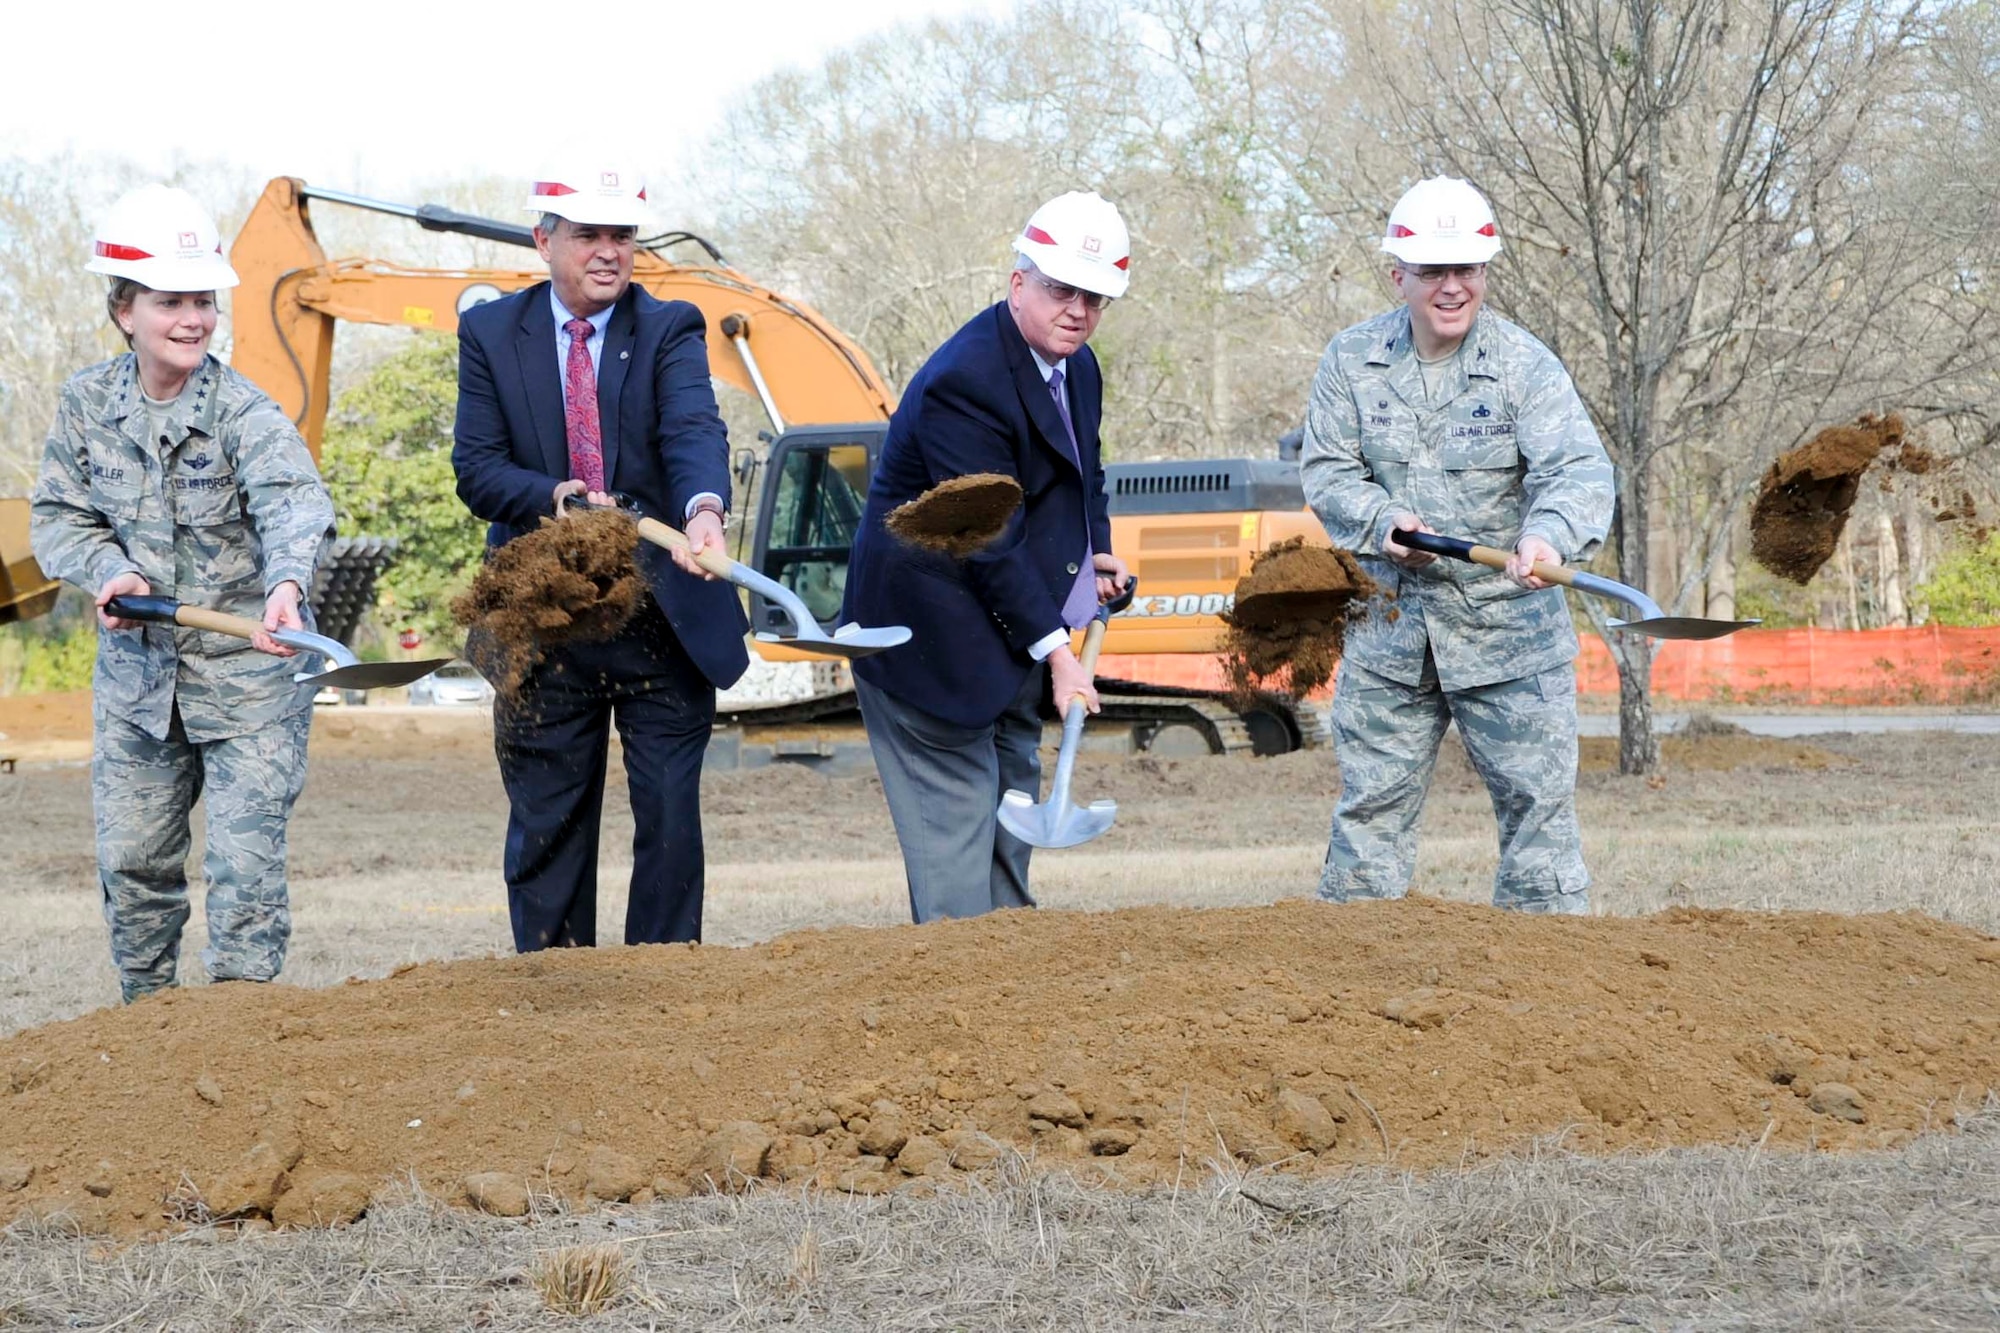 From left, Lt. Gen. Maryanne Miller, Air Force Reserve Command commander, Randy Toms, Warner Robins mayor, Tommy Stalnaker, Houston County commissioner and Col. Jeffrey King, 78th Air Base Wing commander, break ground during a ground-breaking ceremony at Robins Air Force Base, Ga, Feb. 2, 2017. The new AFRC consolidated mission complex is expected to be completed in 2019. (U.S. Air Force photo by Staff Sgt. Ciara Gosier) 